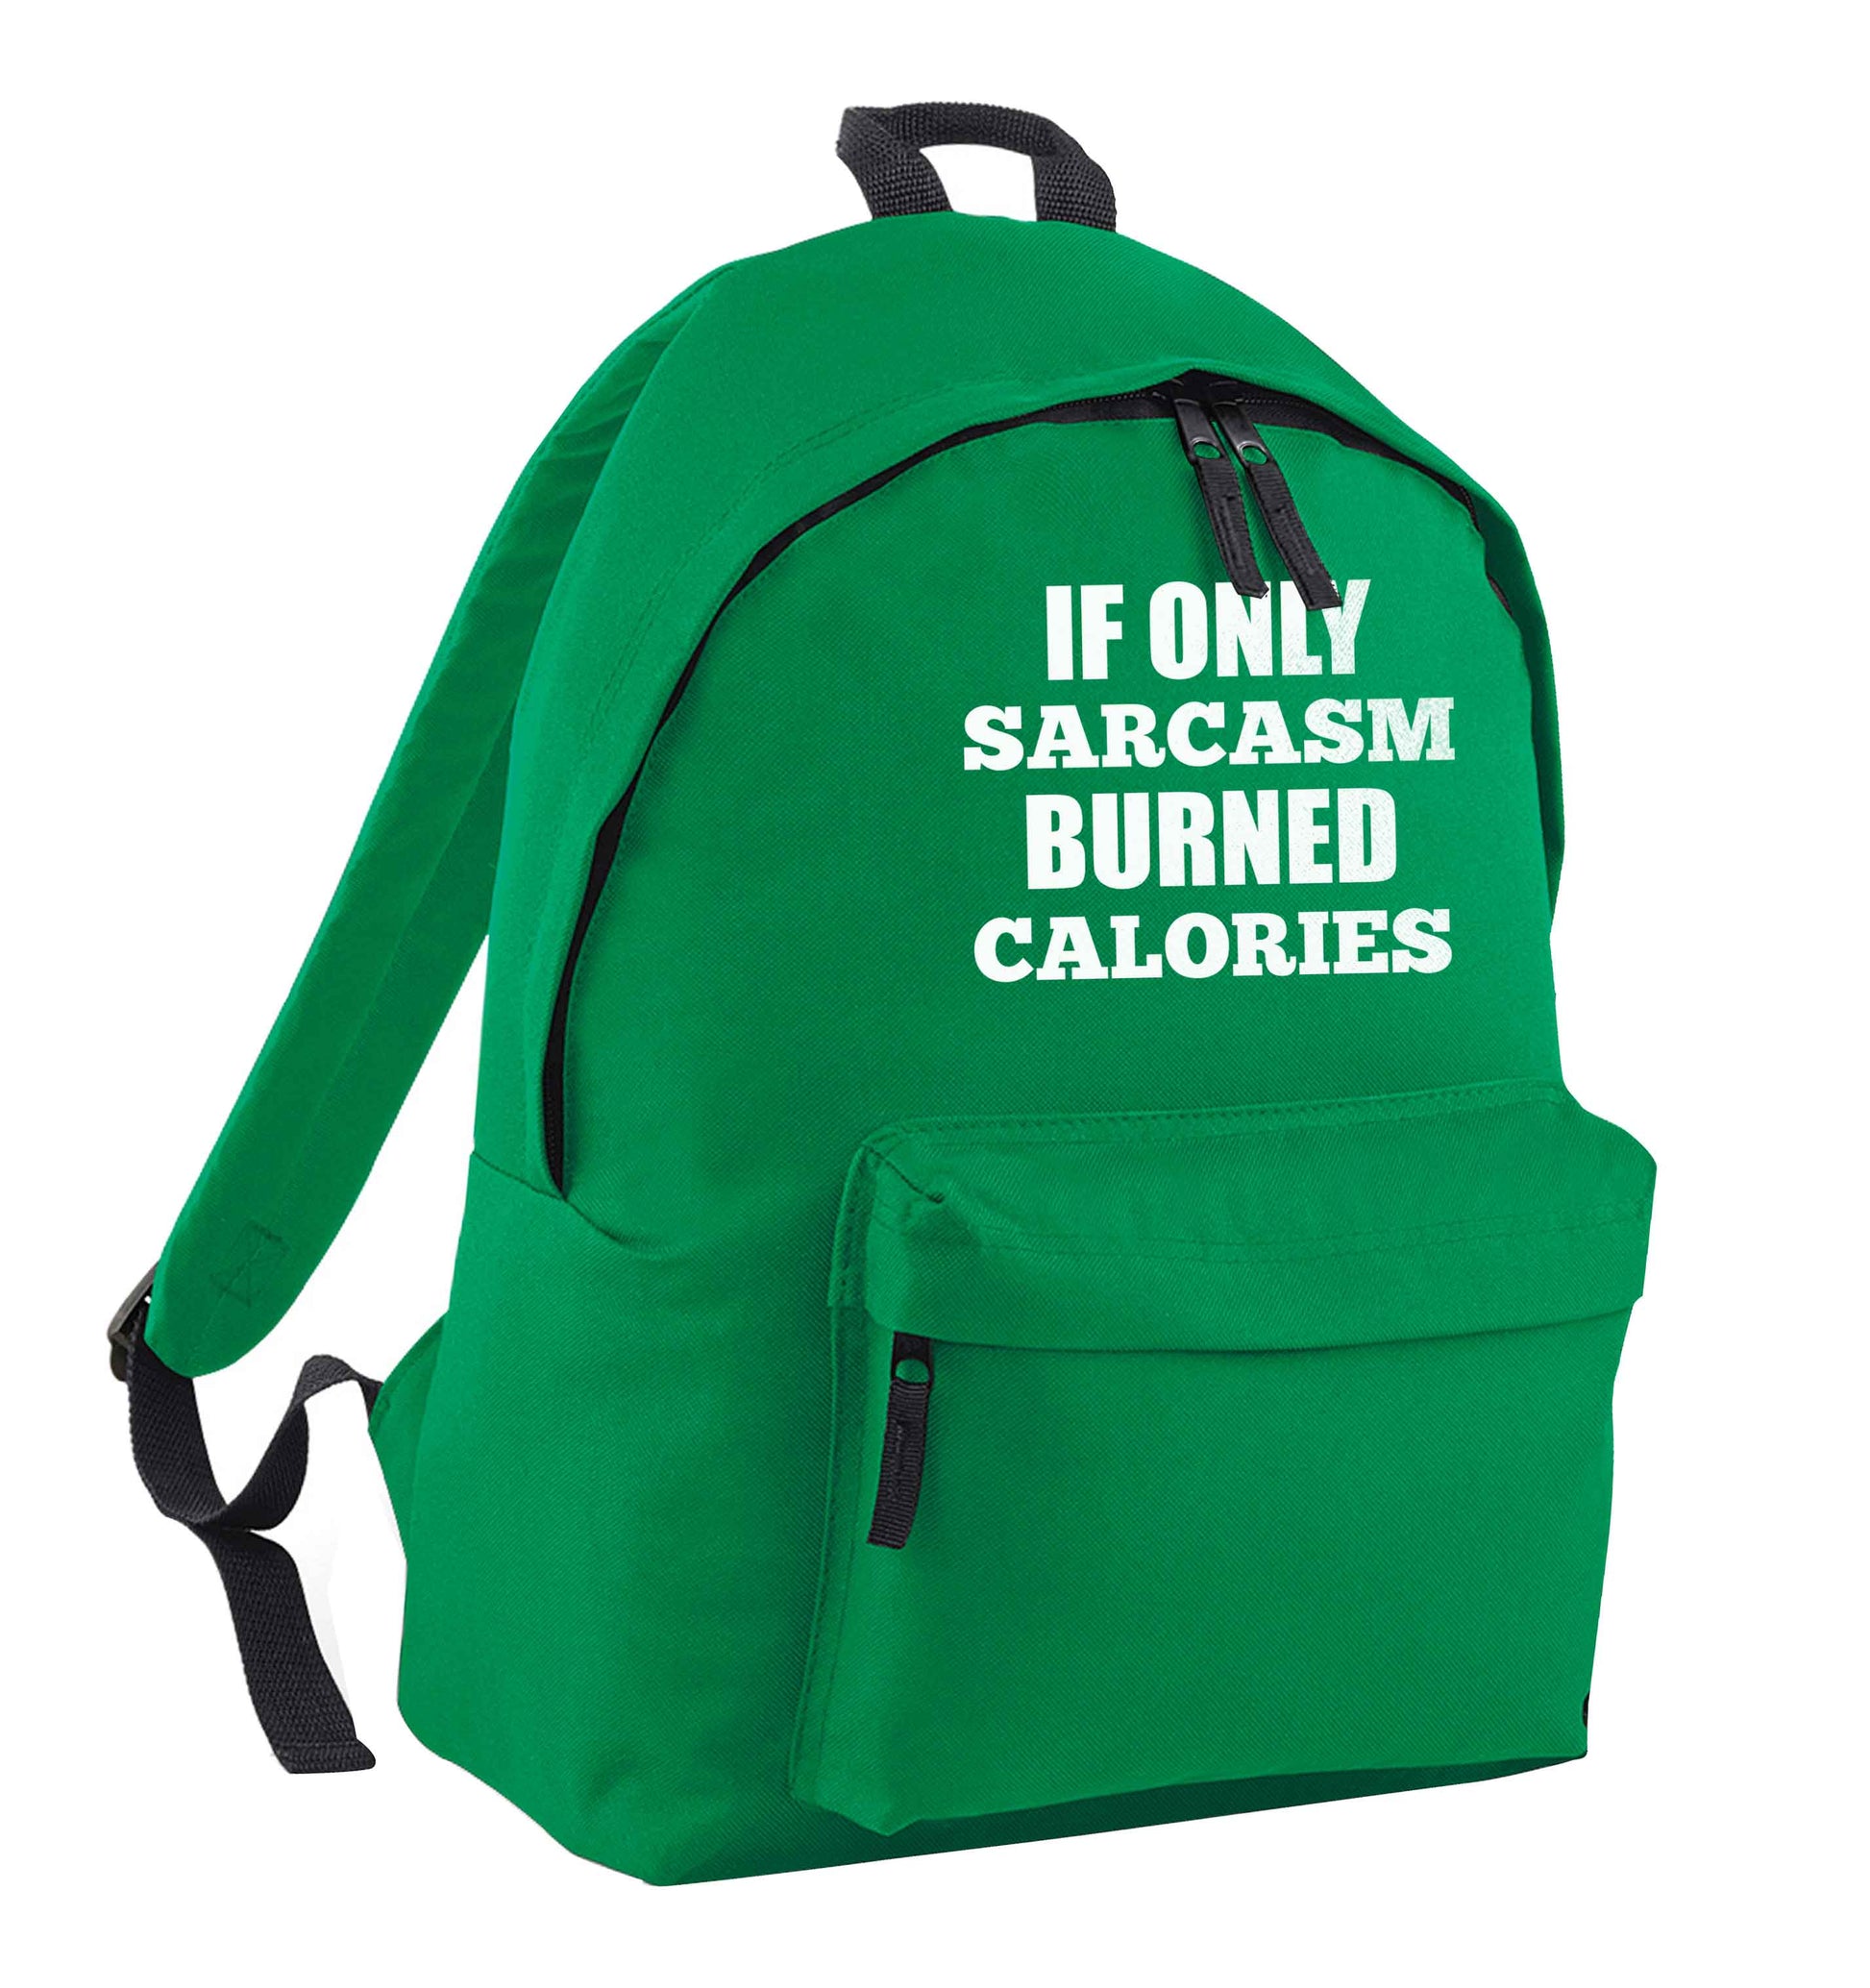 If only sarcasm burned calories green adults backpack